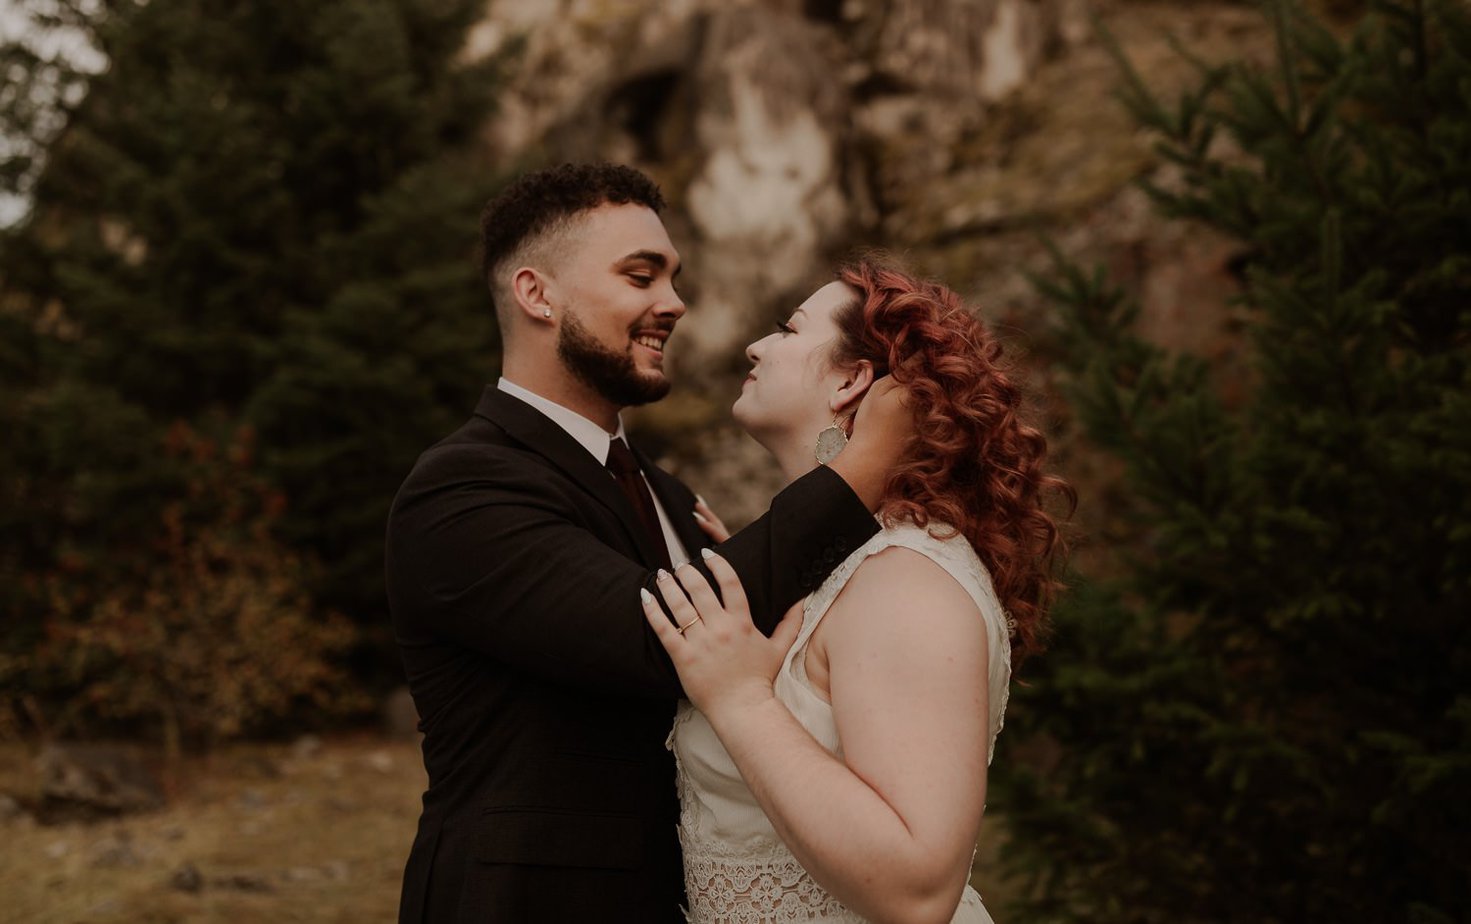 Bride and groom embrace at Government cove in the Columbia River gorge for their Oregon adventure elopement. Groom runs his fingers through the bride's bright red hair. The bride looks lovingly at her new groom